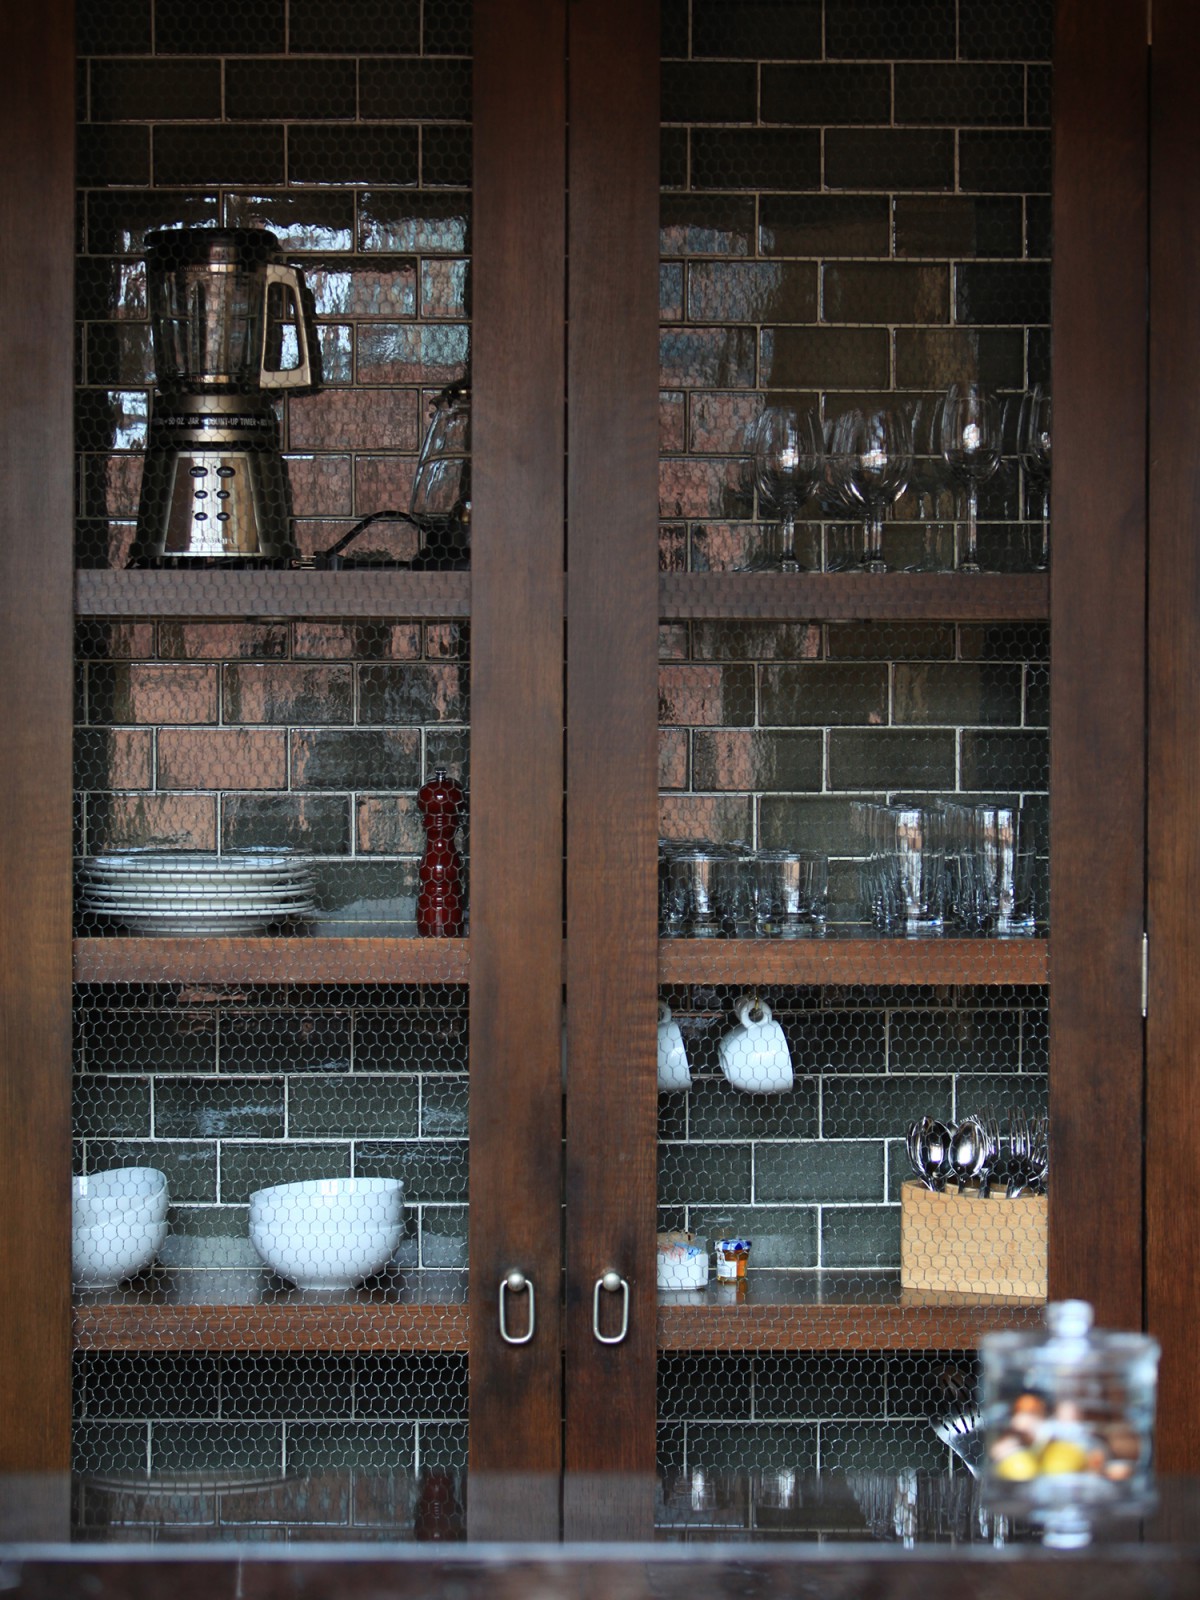 Detail of kitchen cabinetry in the N. Moore Penthouse at the Greenwich Hotel